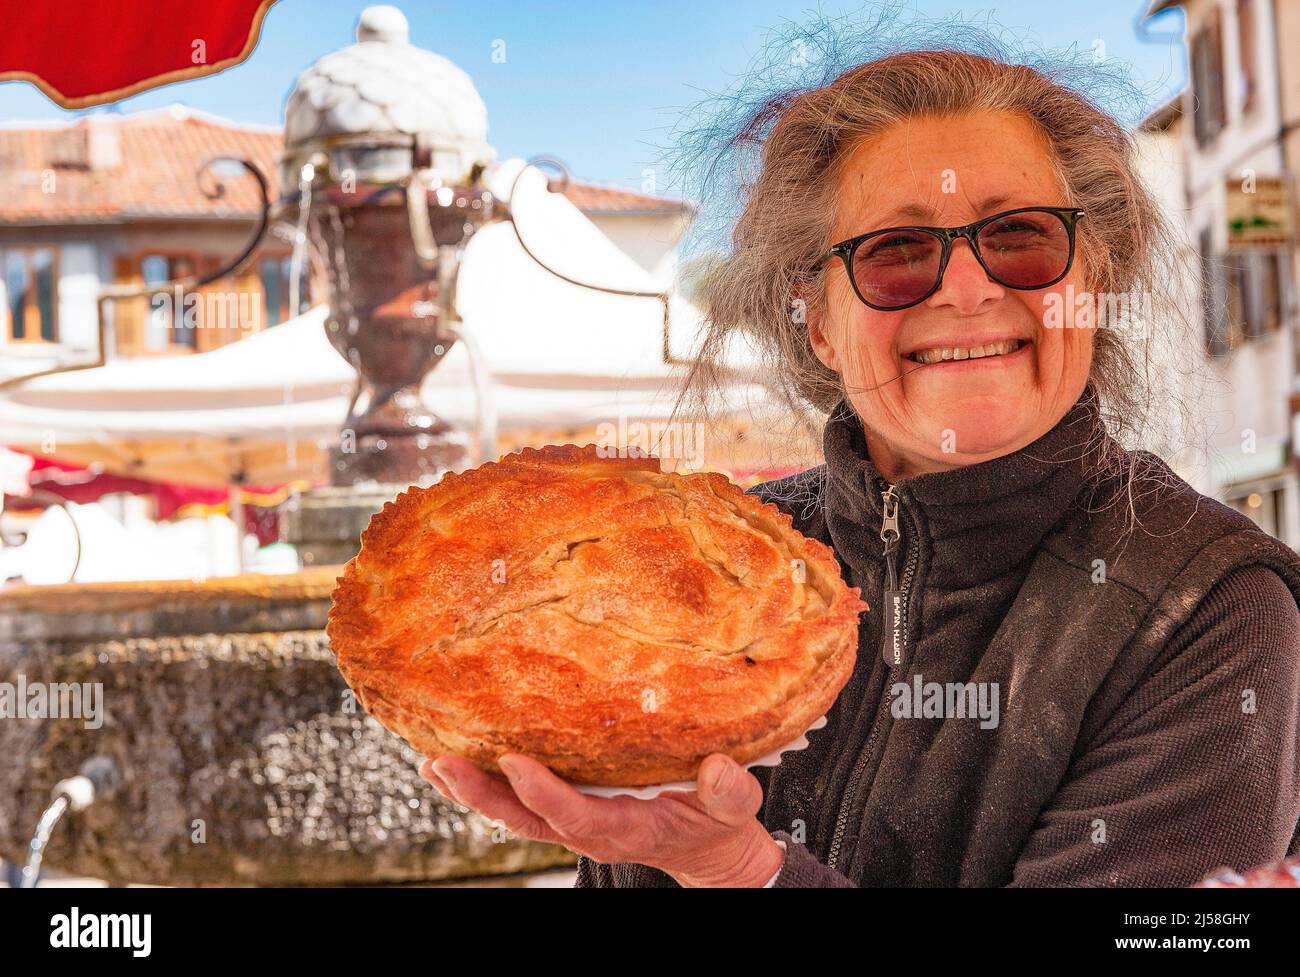 Nathalie Quintin  is selling homemade “croustade” cake at the farmers’ market of Aspet, France Stock Photo